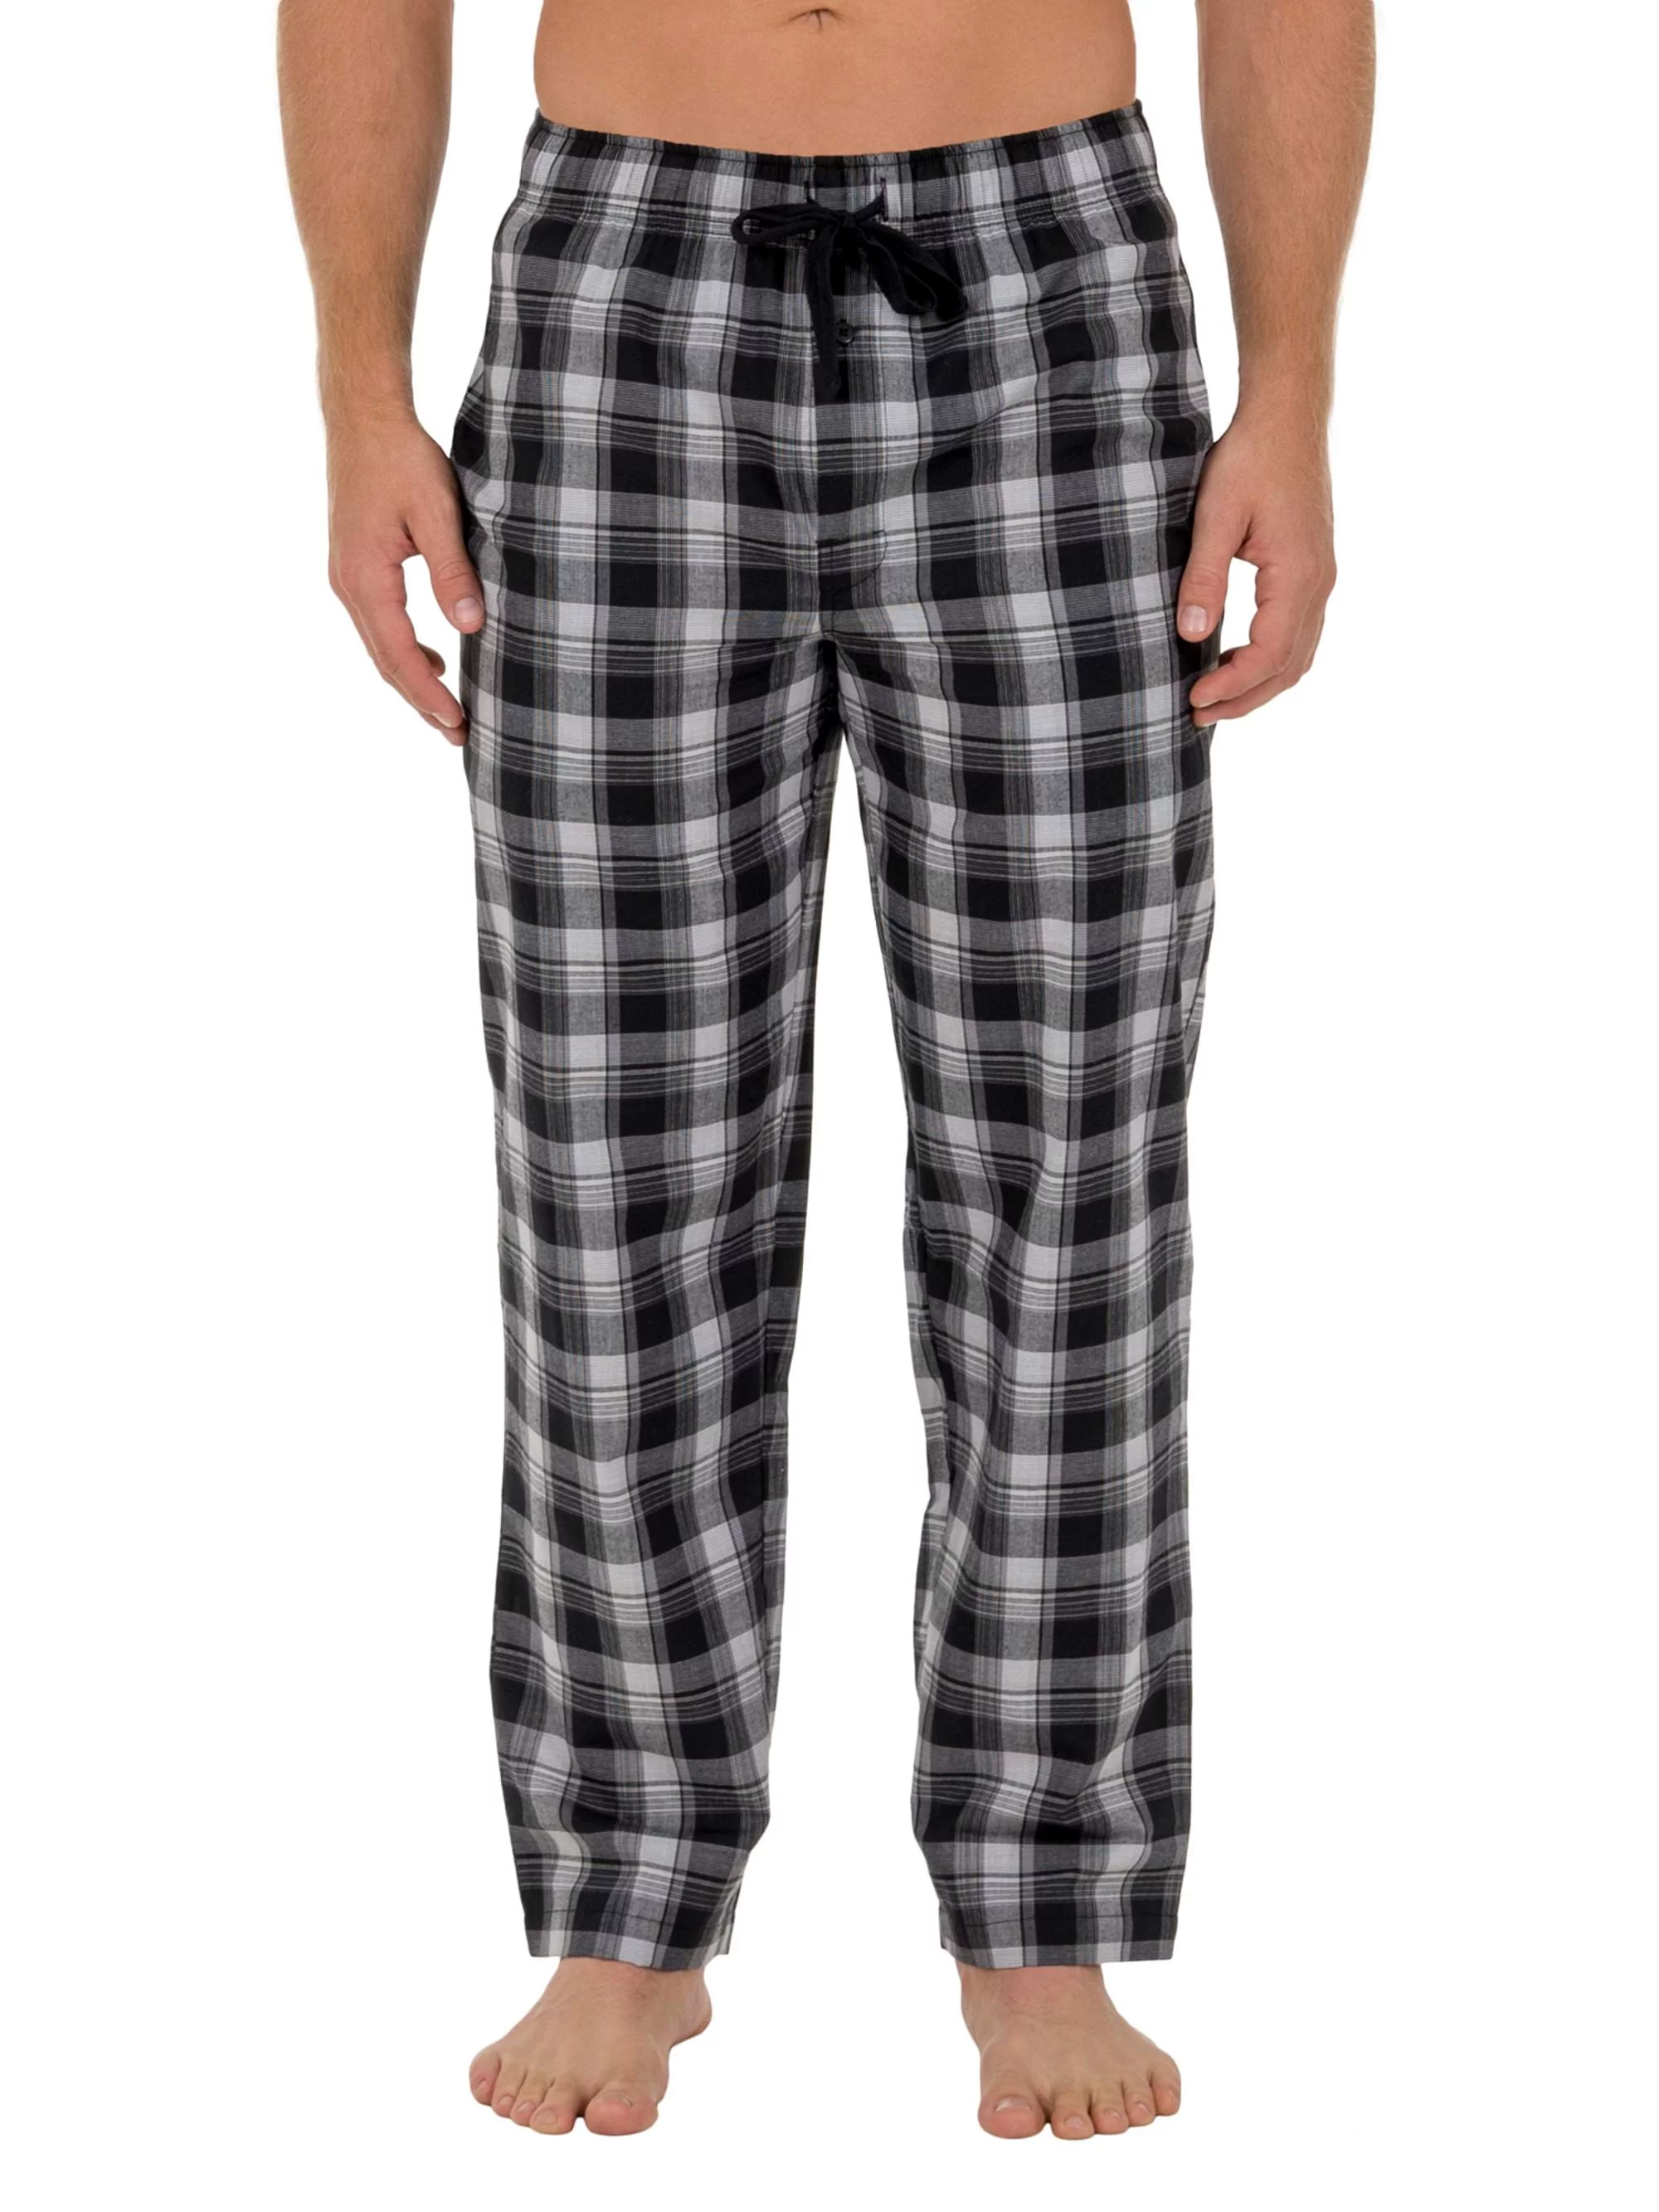 Fruit of the Loom Men's and Big Men's Microsanded Woven Plaid Pajama Pants, Sizes S-6XL